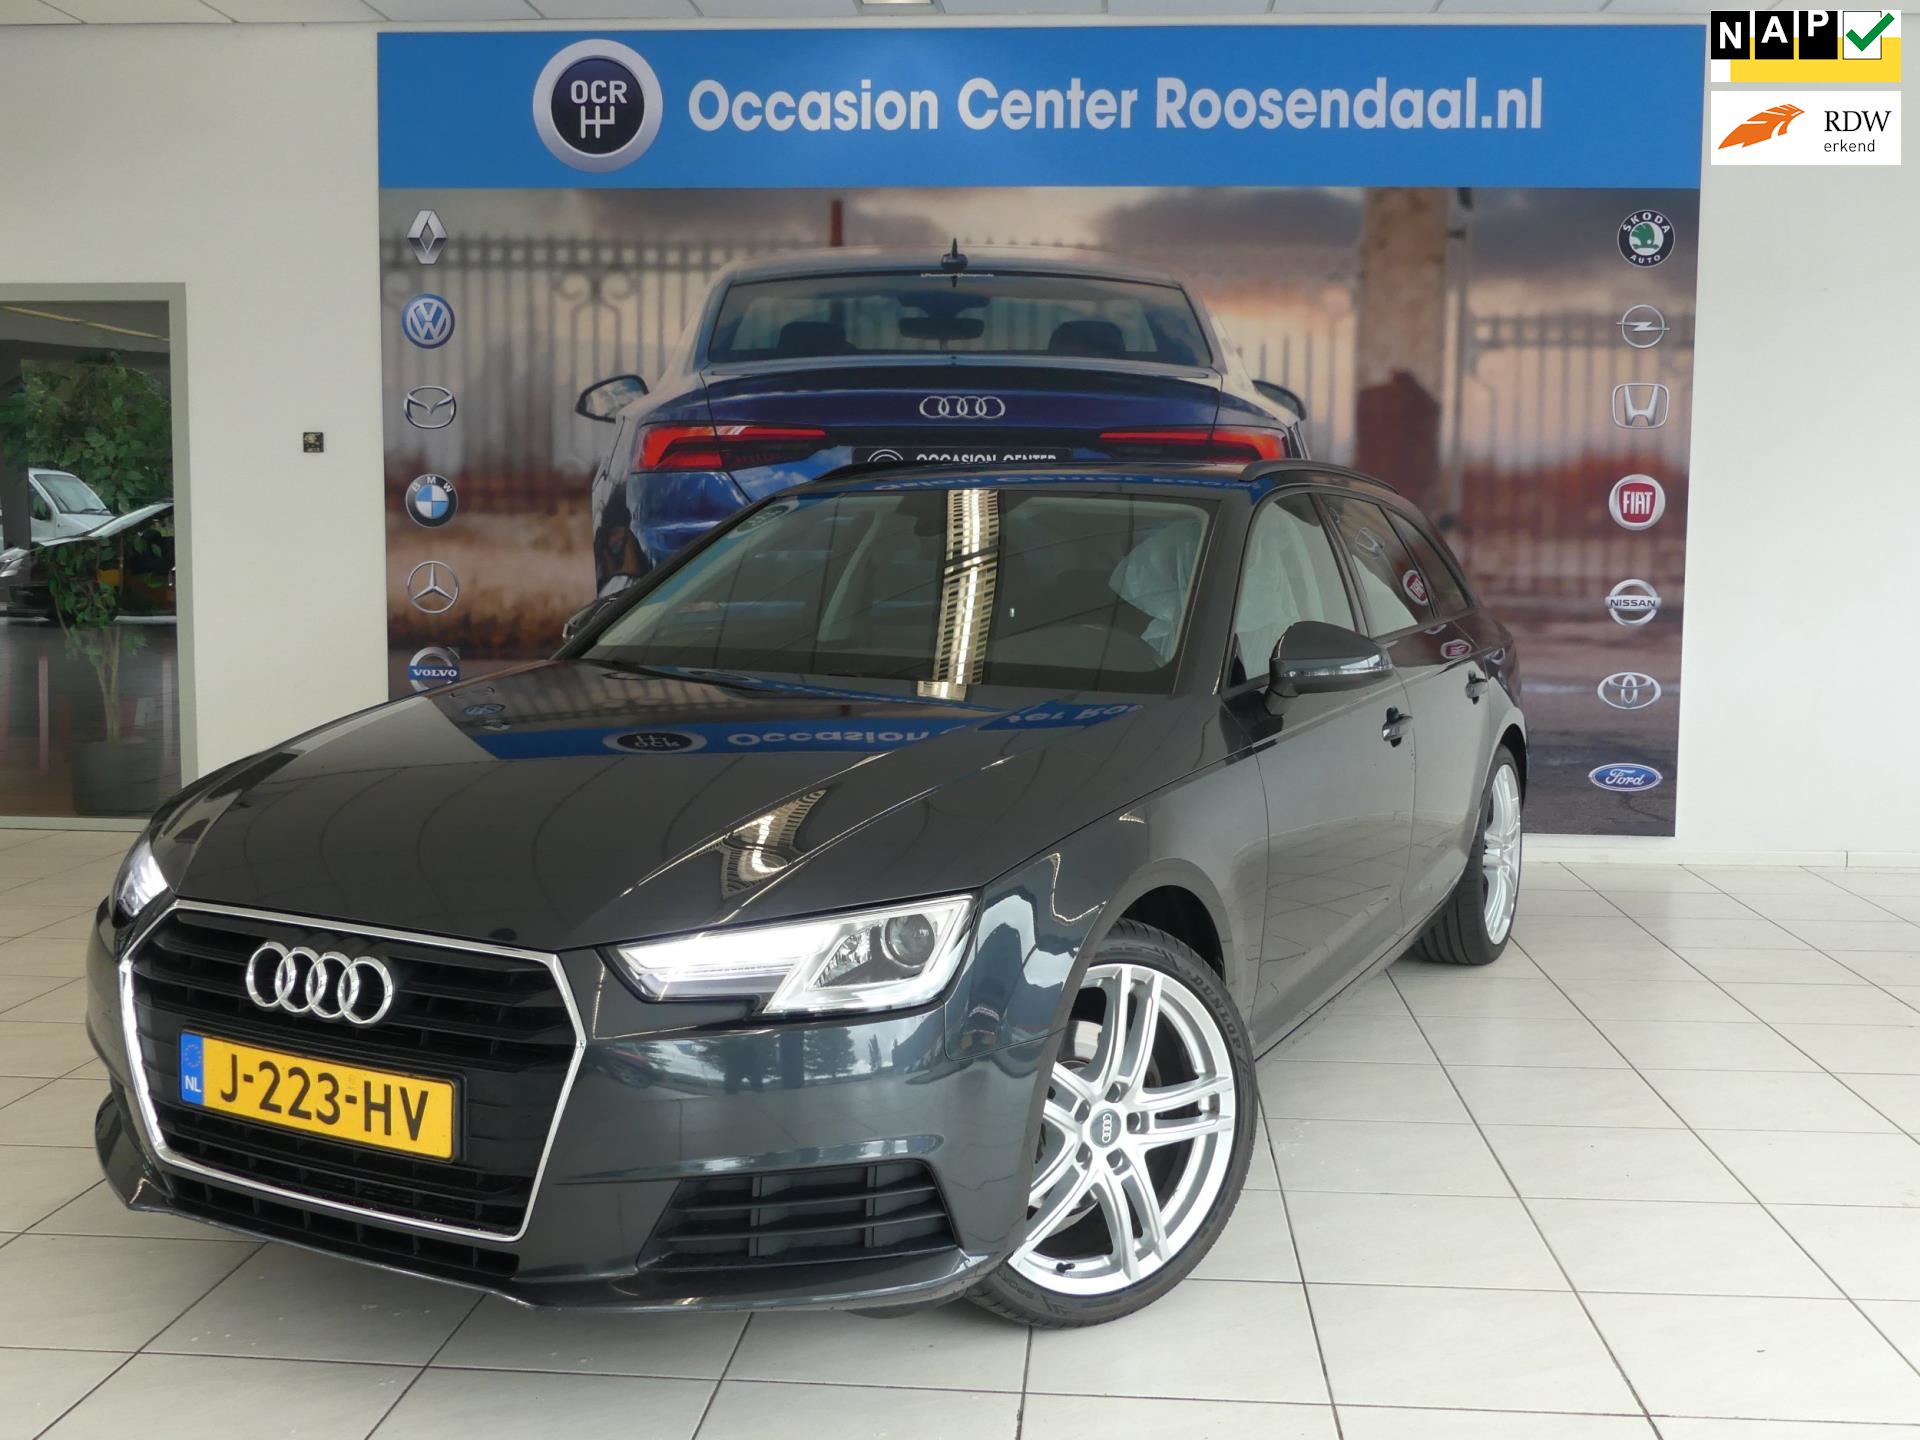 Audi A4 Avant - 2.0 TDI Automaat Navigatie Cruise Control Climate Control Led+Xenon Afn.trekhaak Diesel uit - www.occasioncenterroosendaal.nl